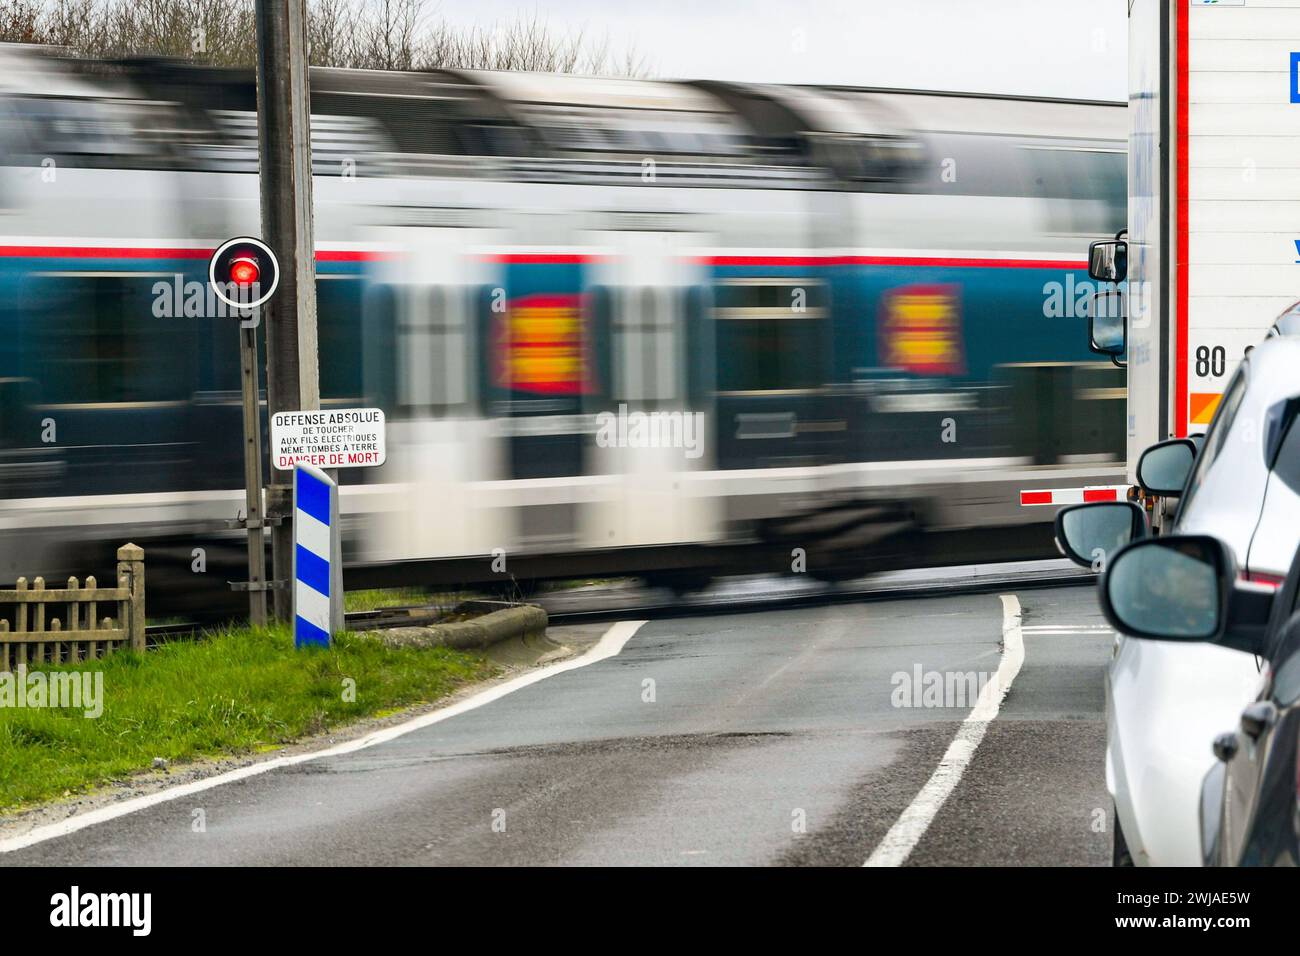 Railway level crossing on a country road with automatic railway gate. Automatic gates down, gates closed, red flashing light and cars at a standstill Stock Photo